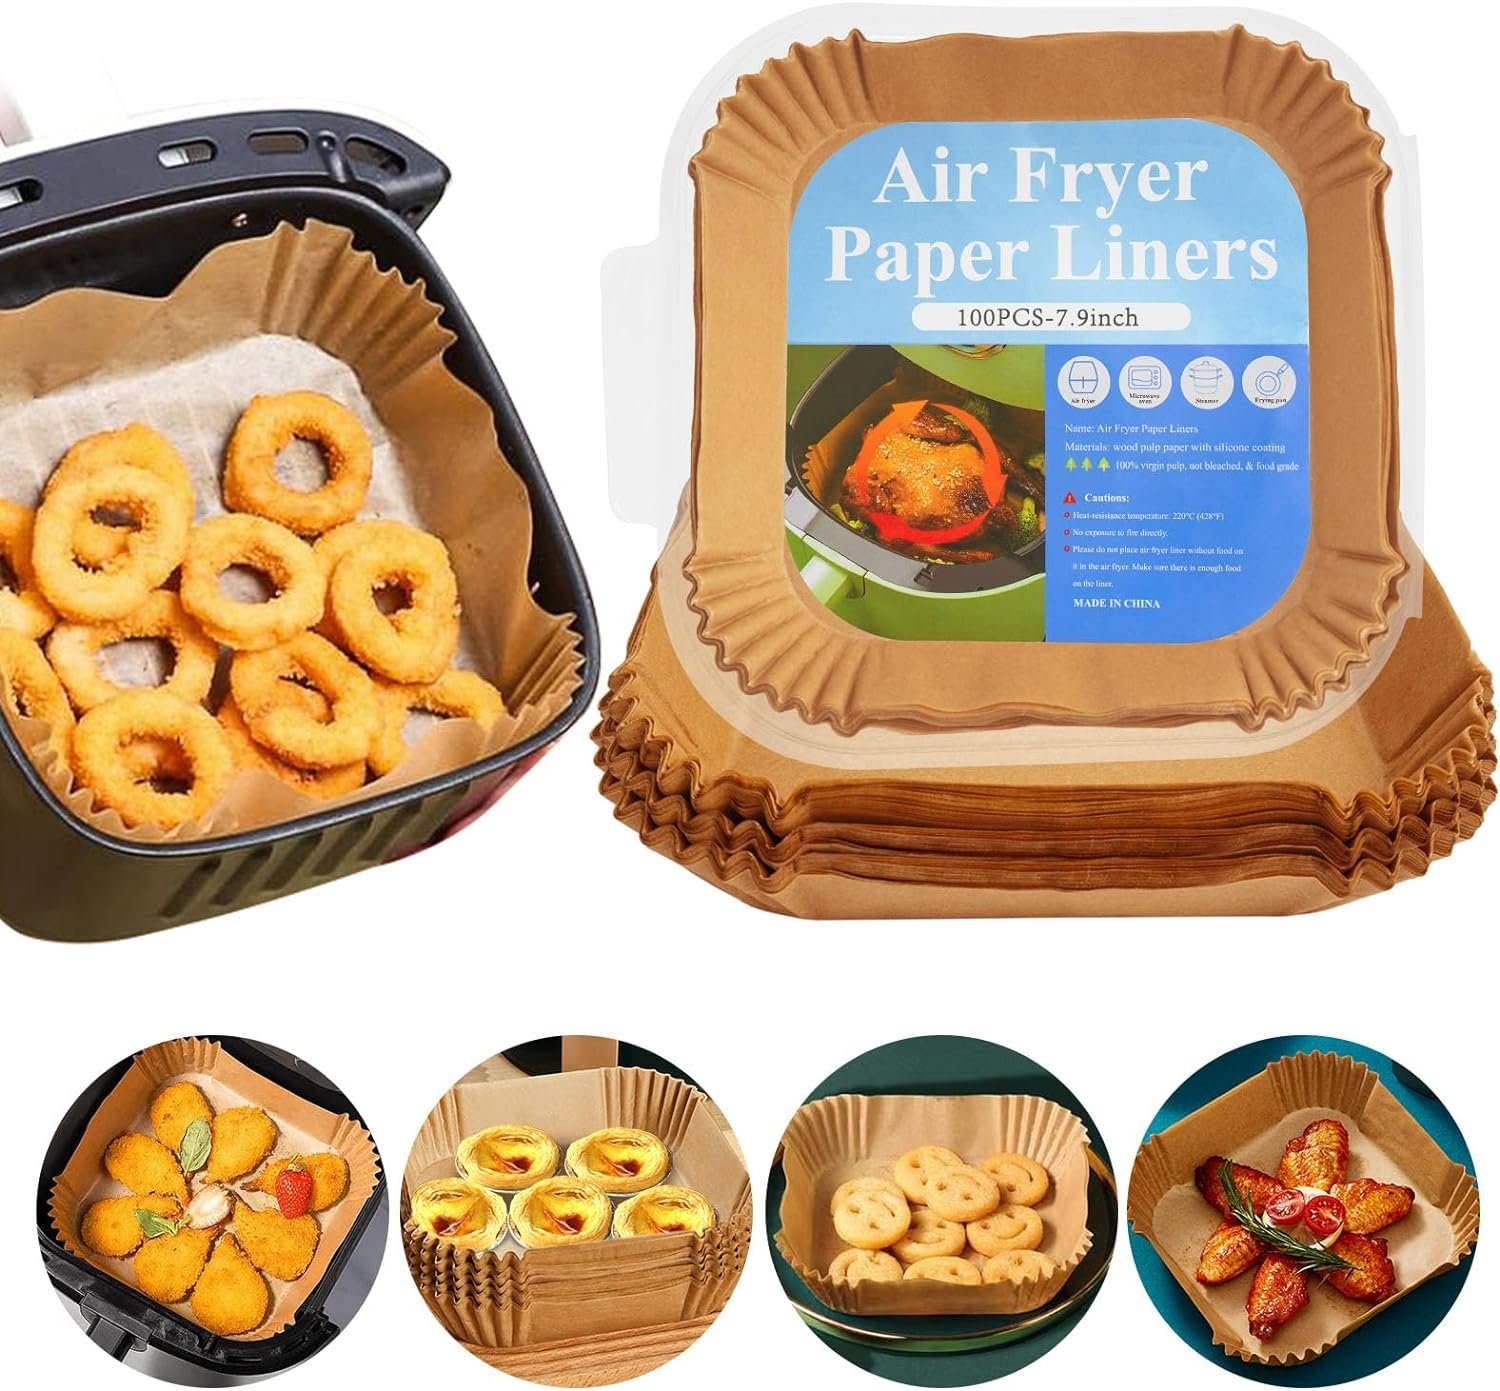 Air Fryer Paper Liners,100Pcs Parchment Paper, Oil-proof, Water-proof, Food Grade 7.9inch (Fit 5-8 QT) Air Fryer Disposable Paper Liner for Microwave Baking Roasting